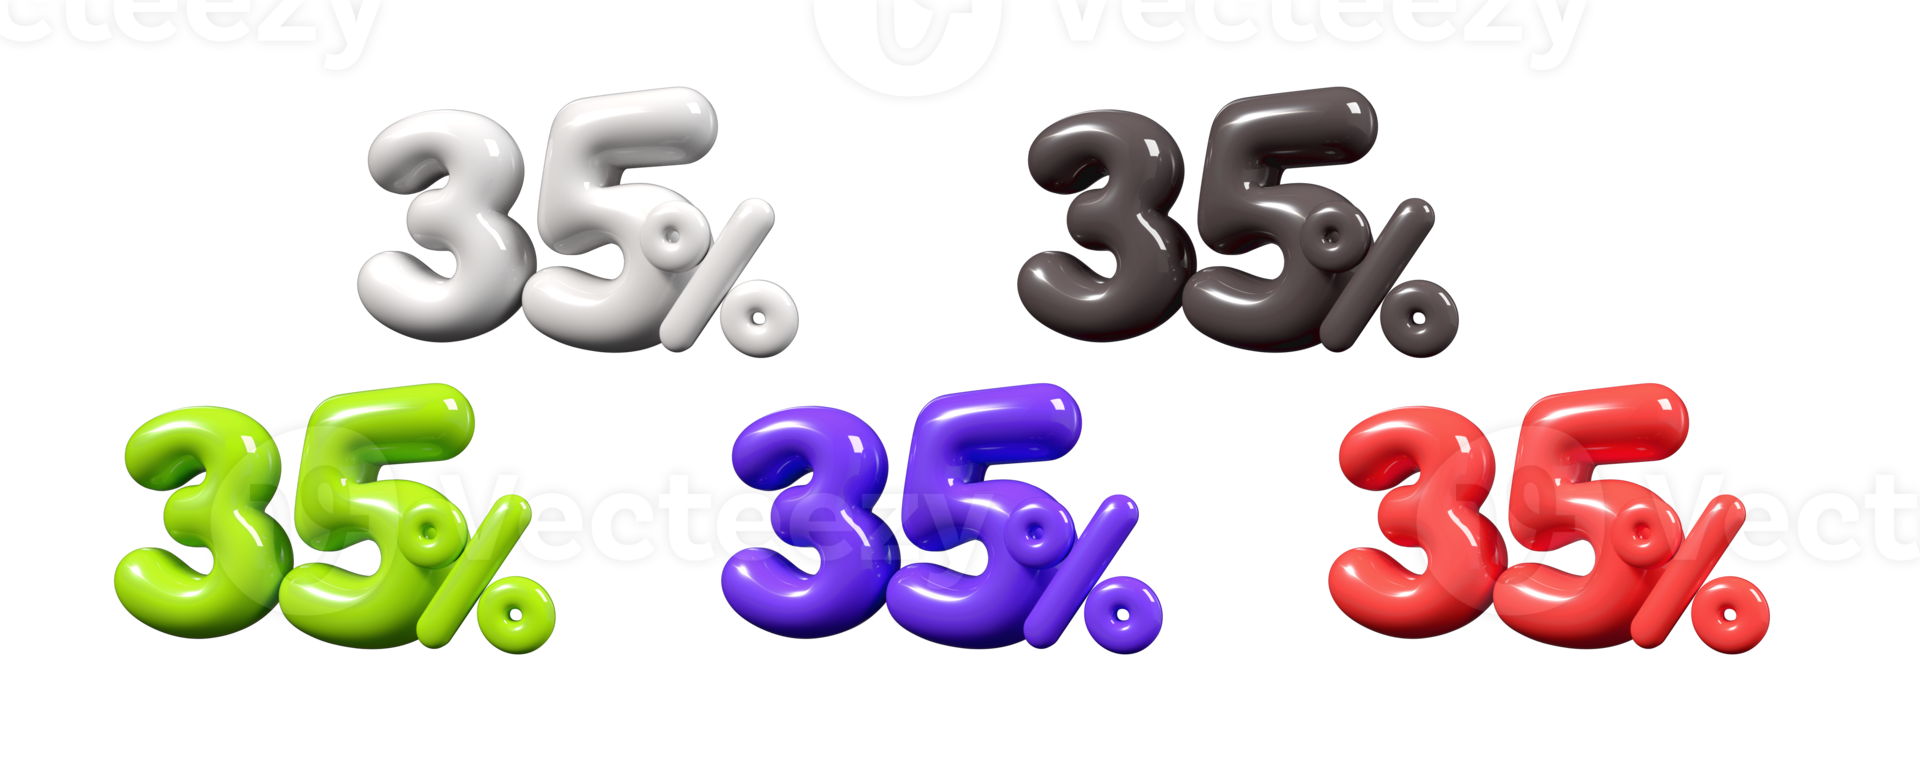 Discount bundle tag sale Trendy 3D number 35 percent element for promoting sales, clearing inventory, and boosting revenue png